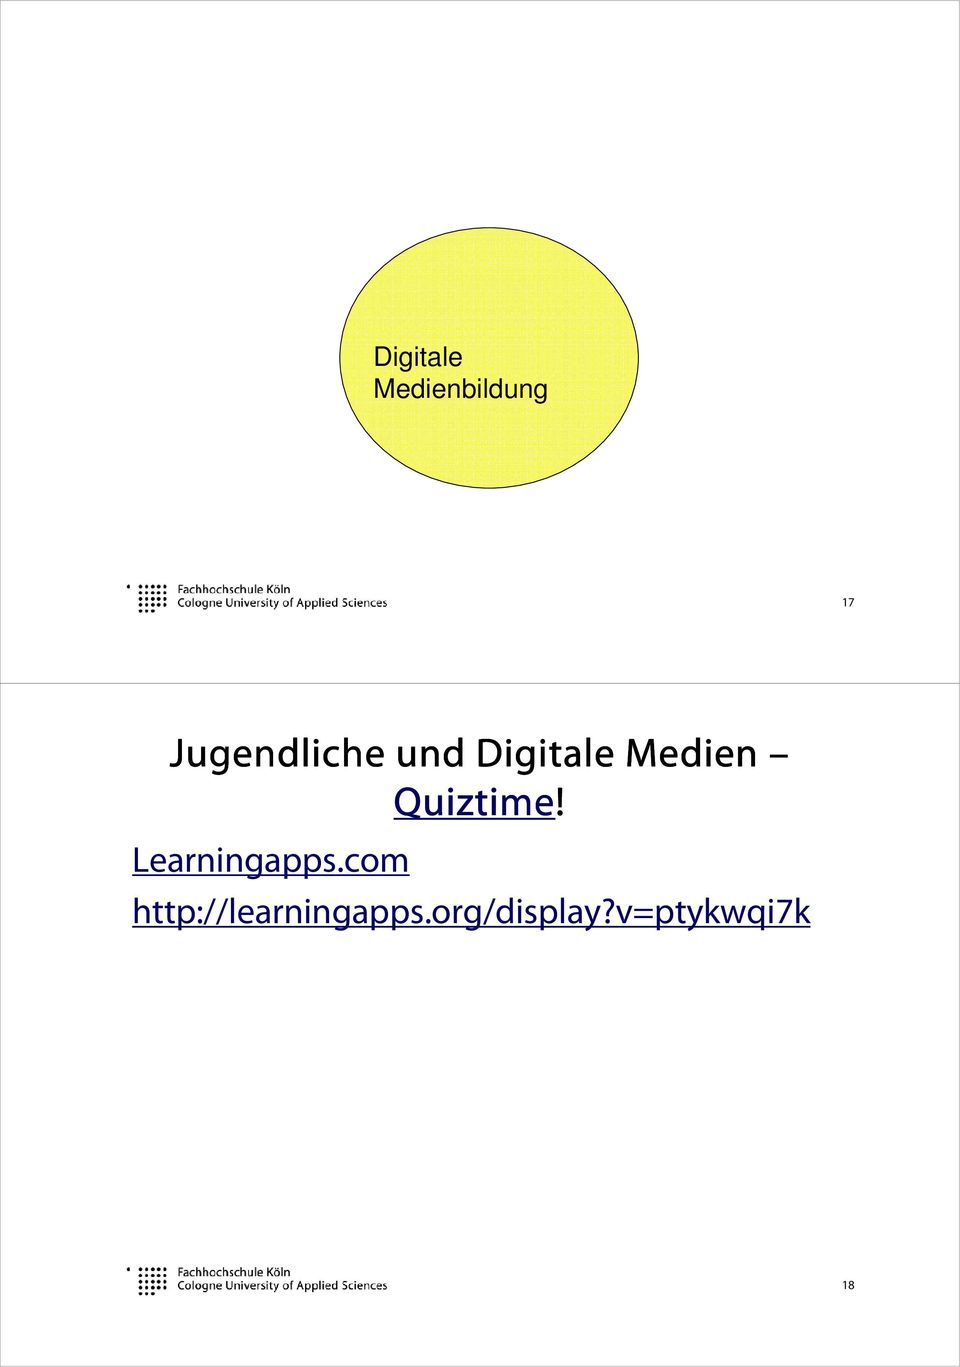 Quiztime! Learningapps.